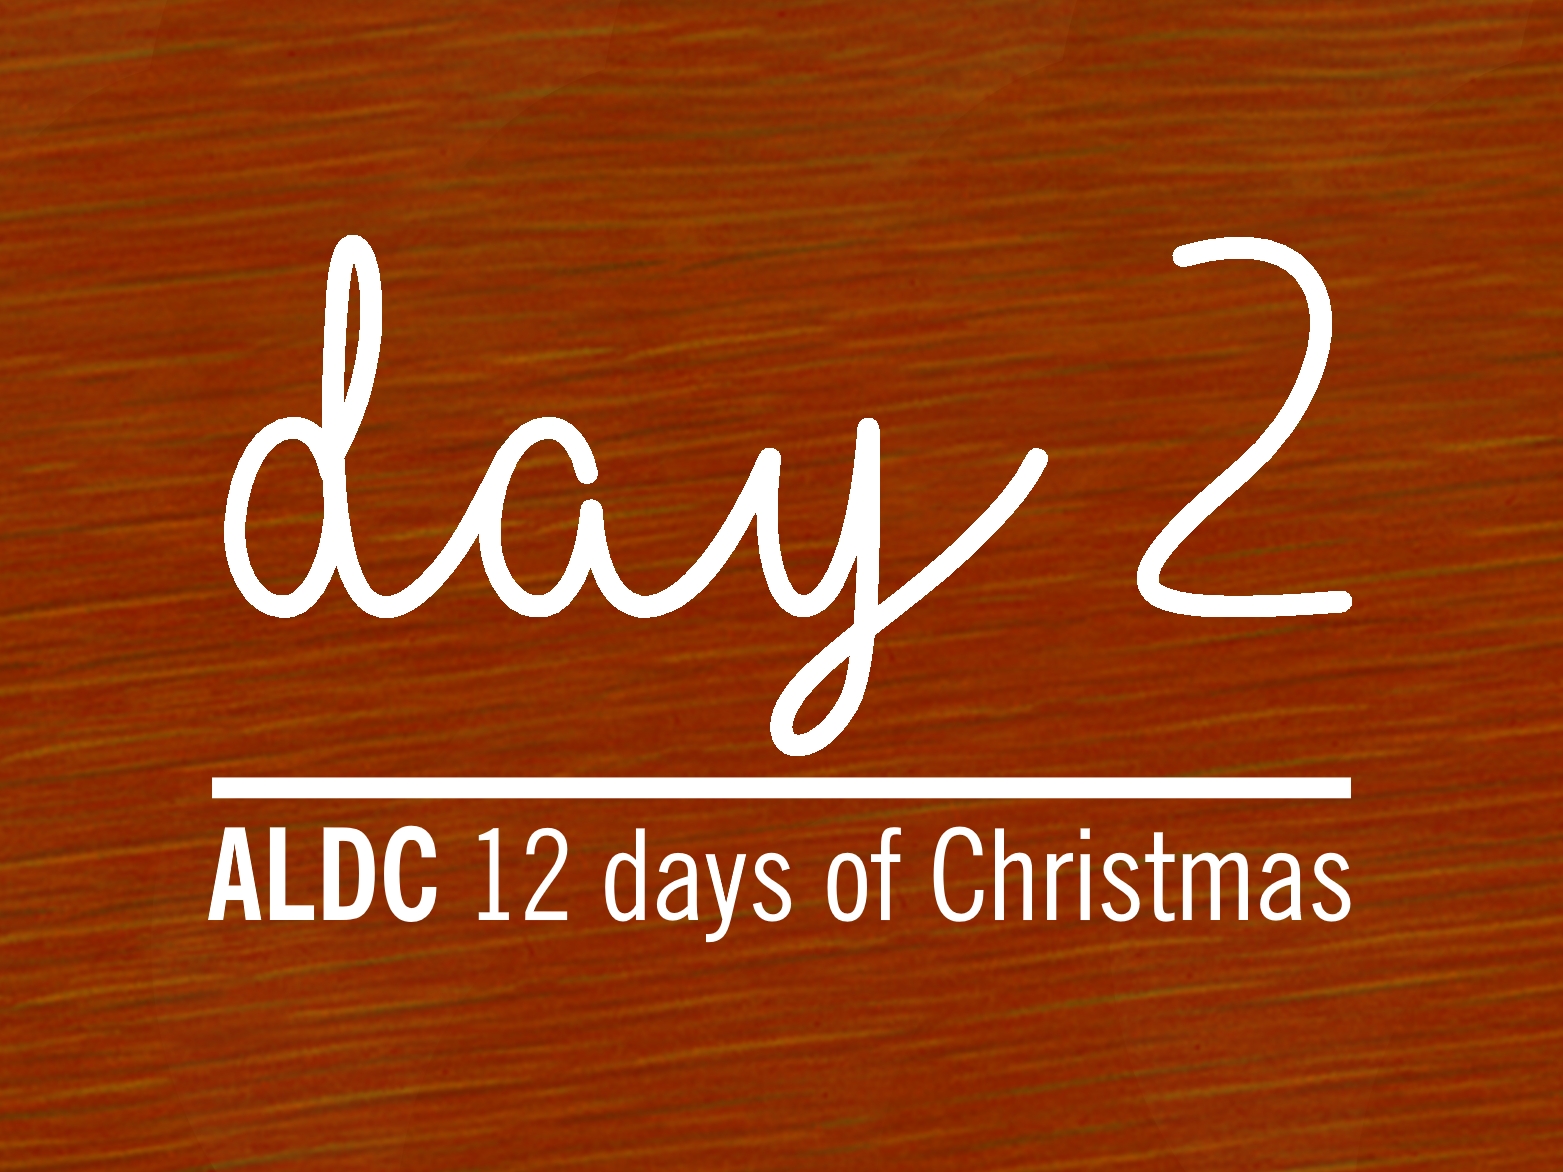 On the second day of Christmas, ALDC gave to me …